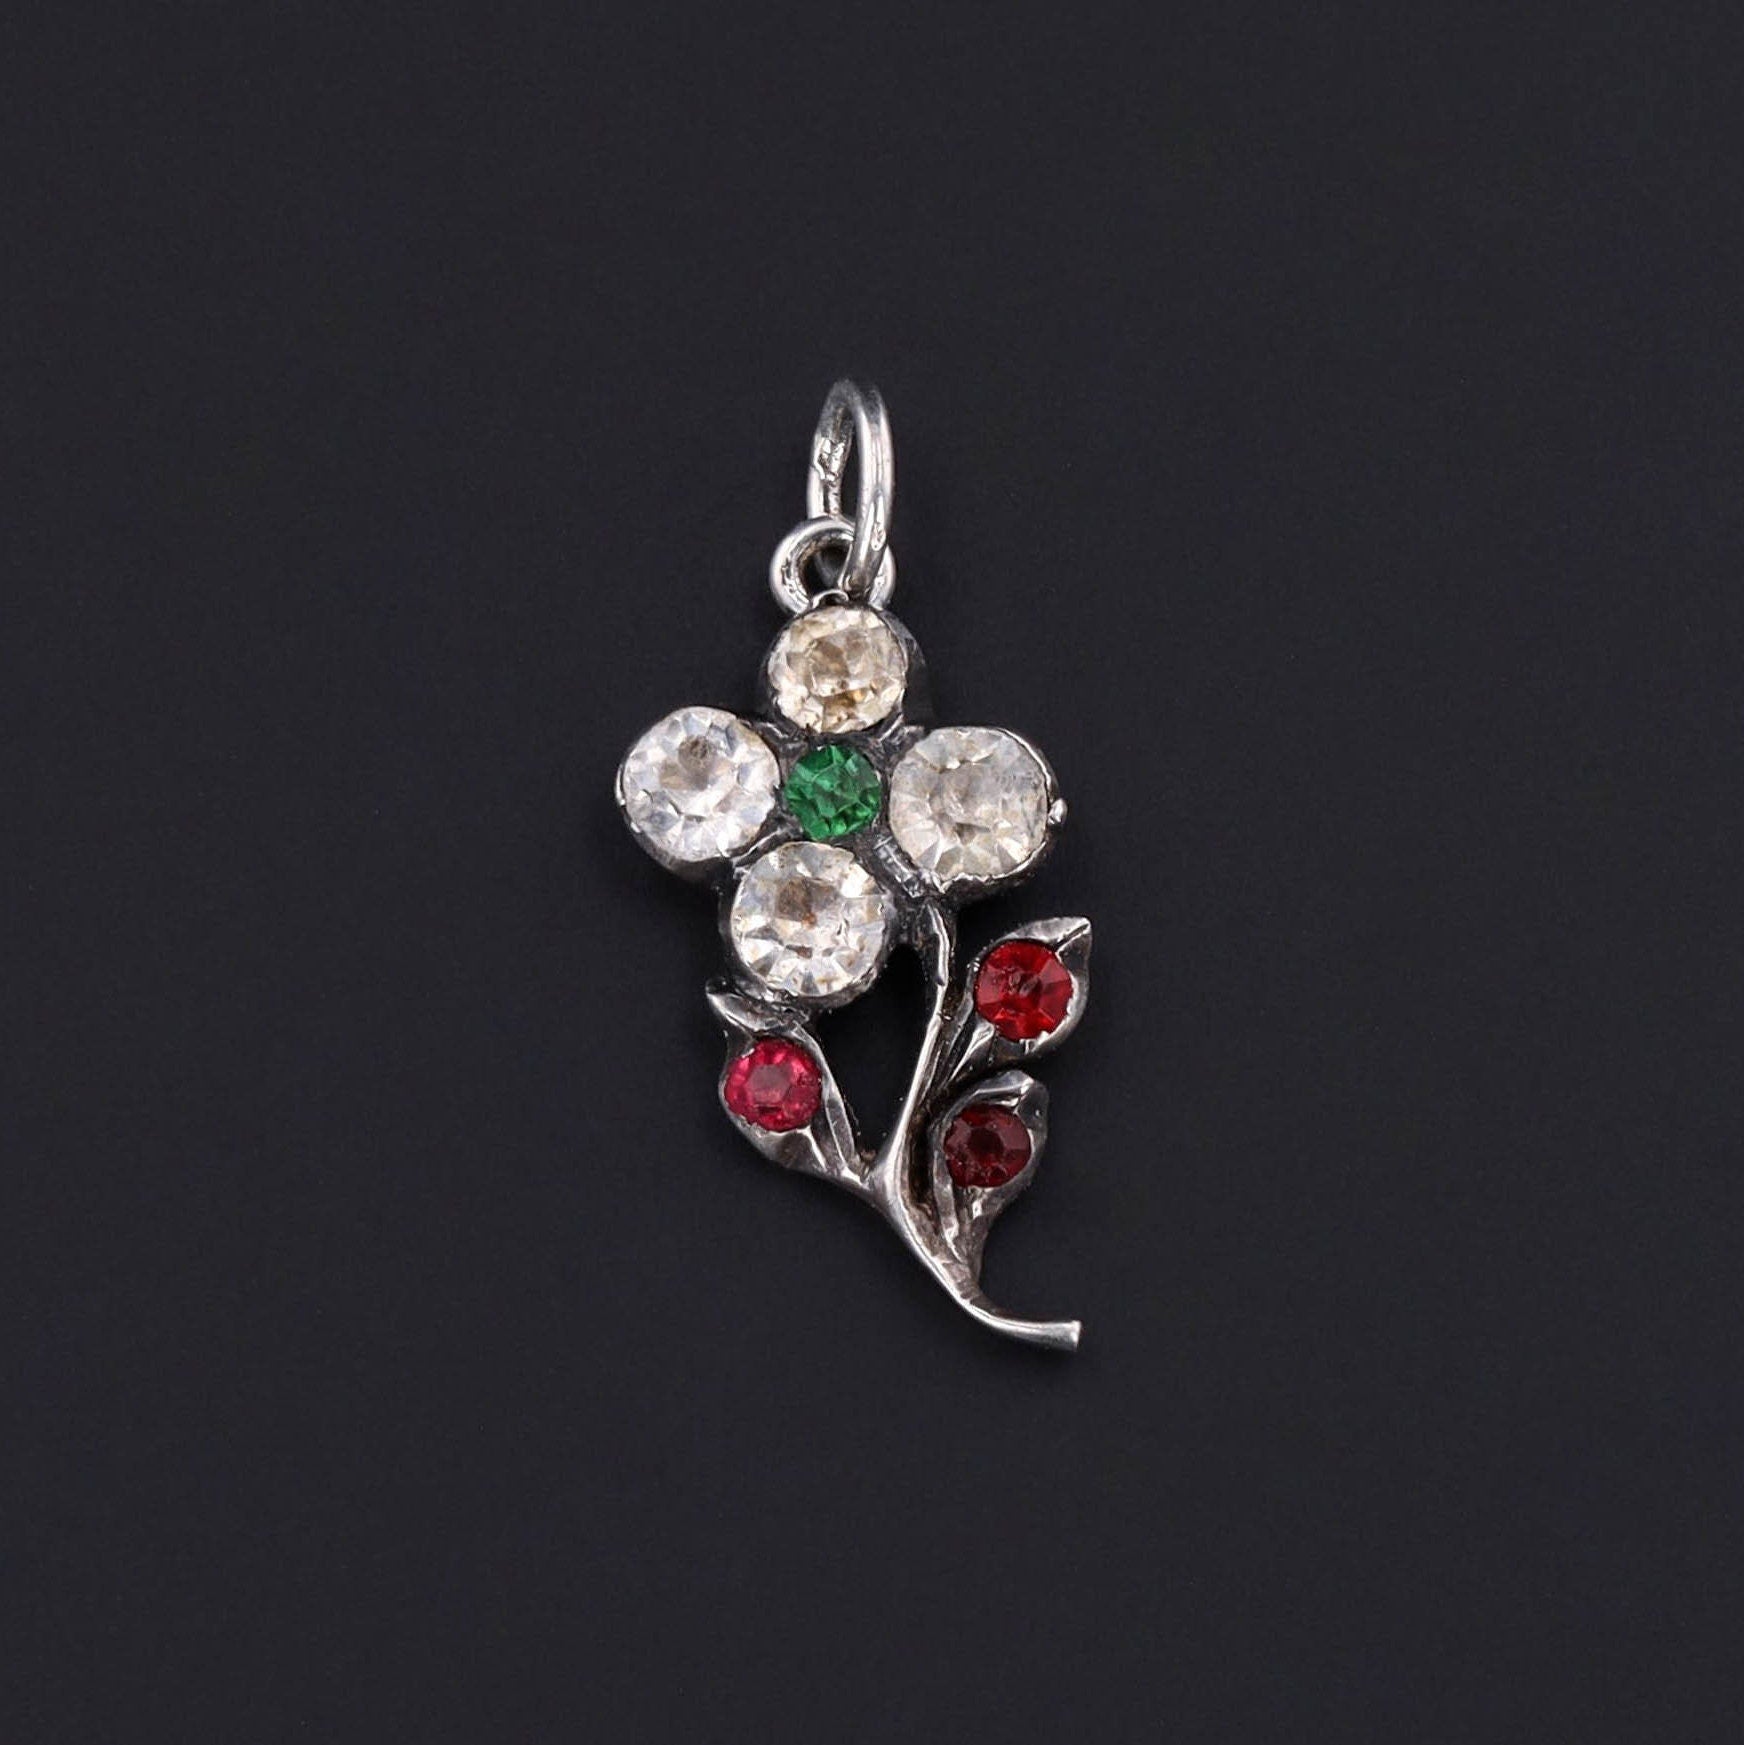 Antique Silver and Paste Flower Charm